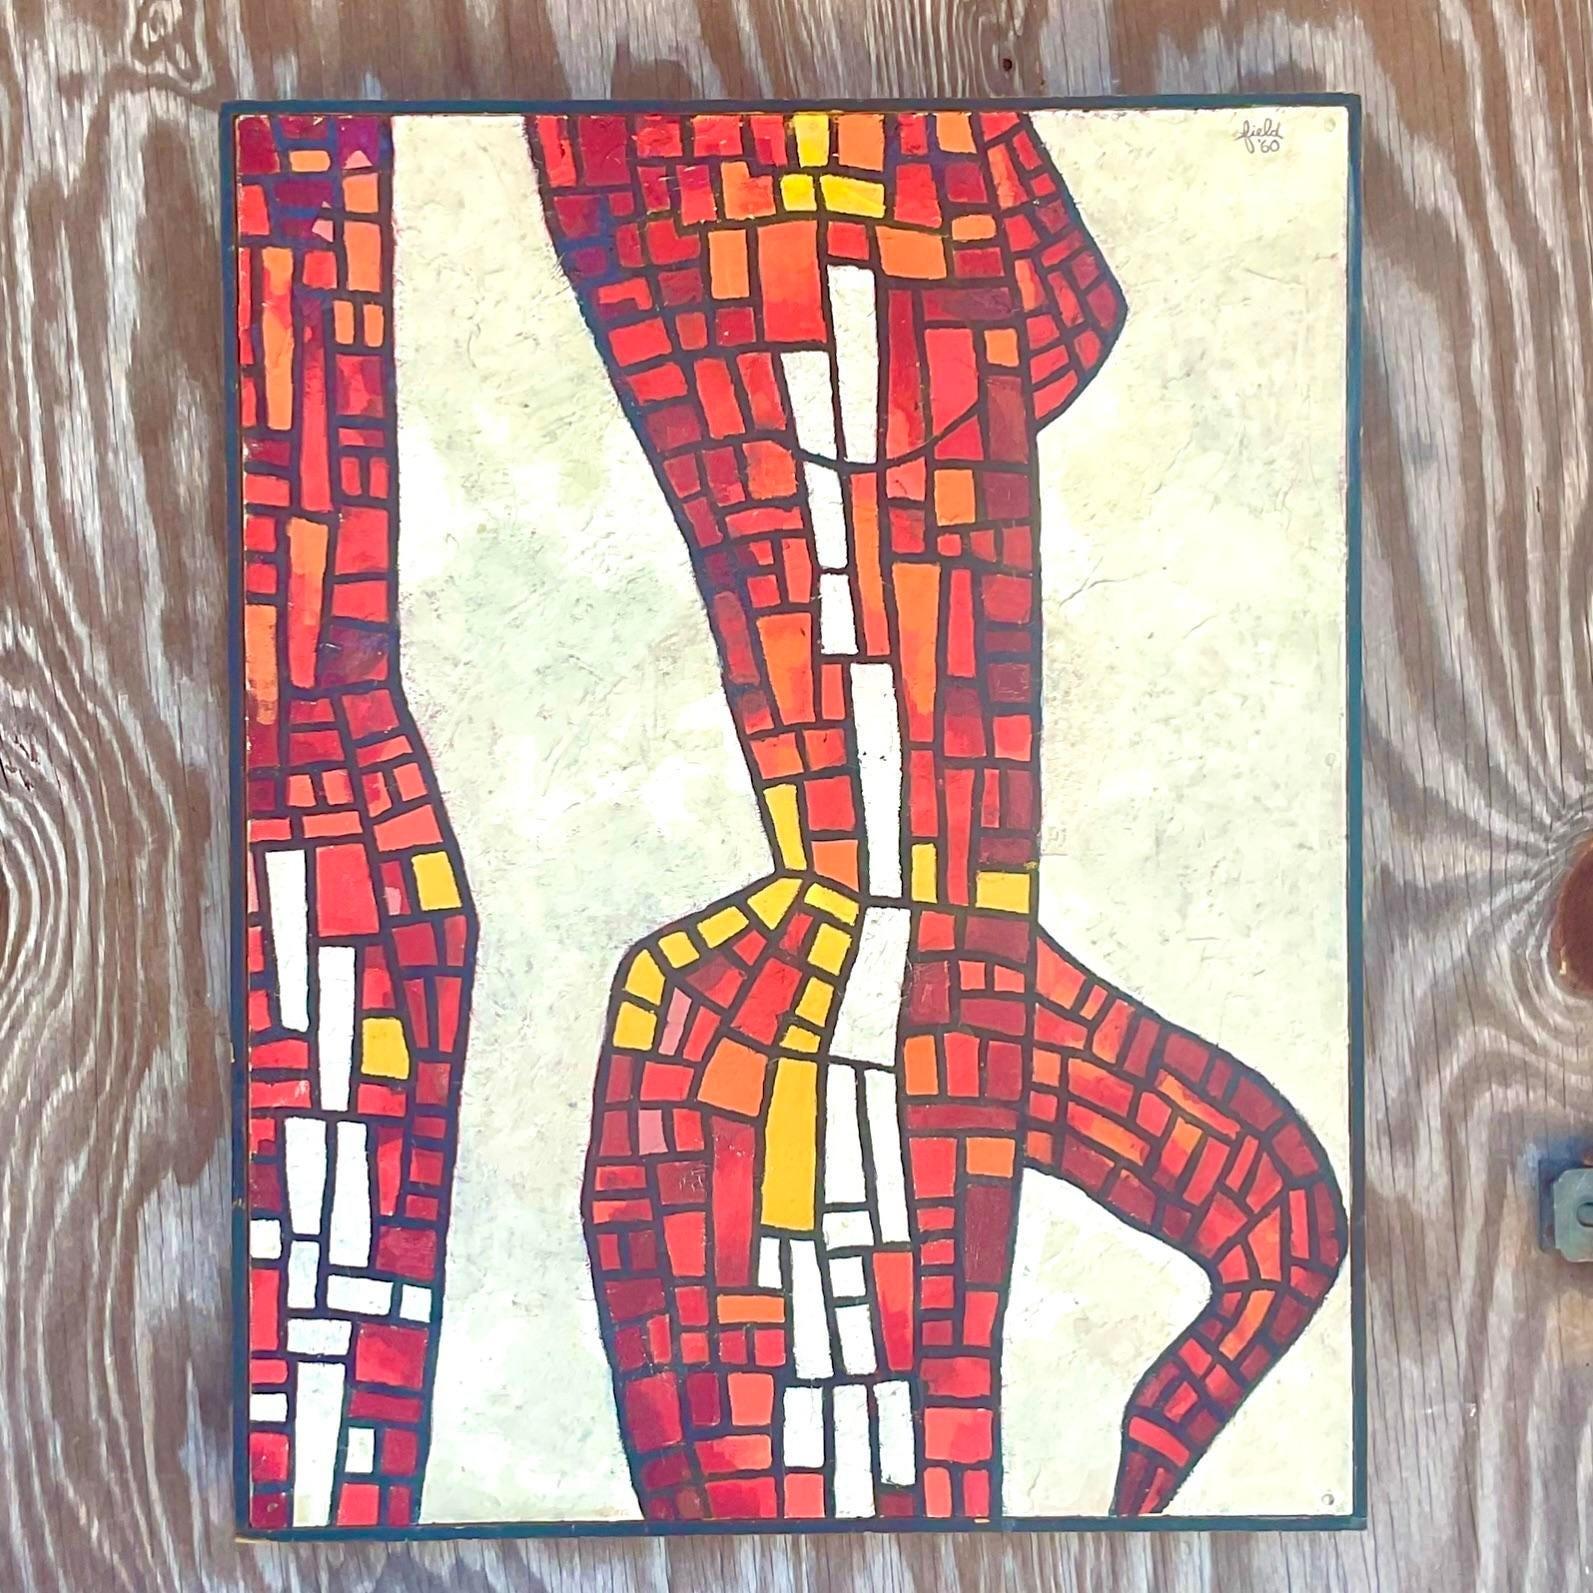 A fabulous vintage Boho original oil painting. A chic abstract expressionist composition in brilliant reds and oranges. Signed and dated by the artist. Acquired from a Palm Beach estate.